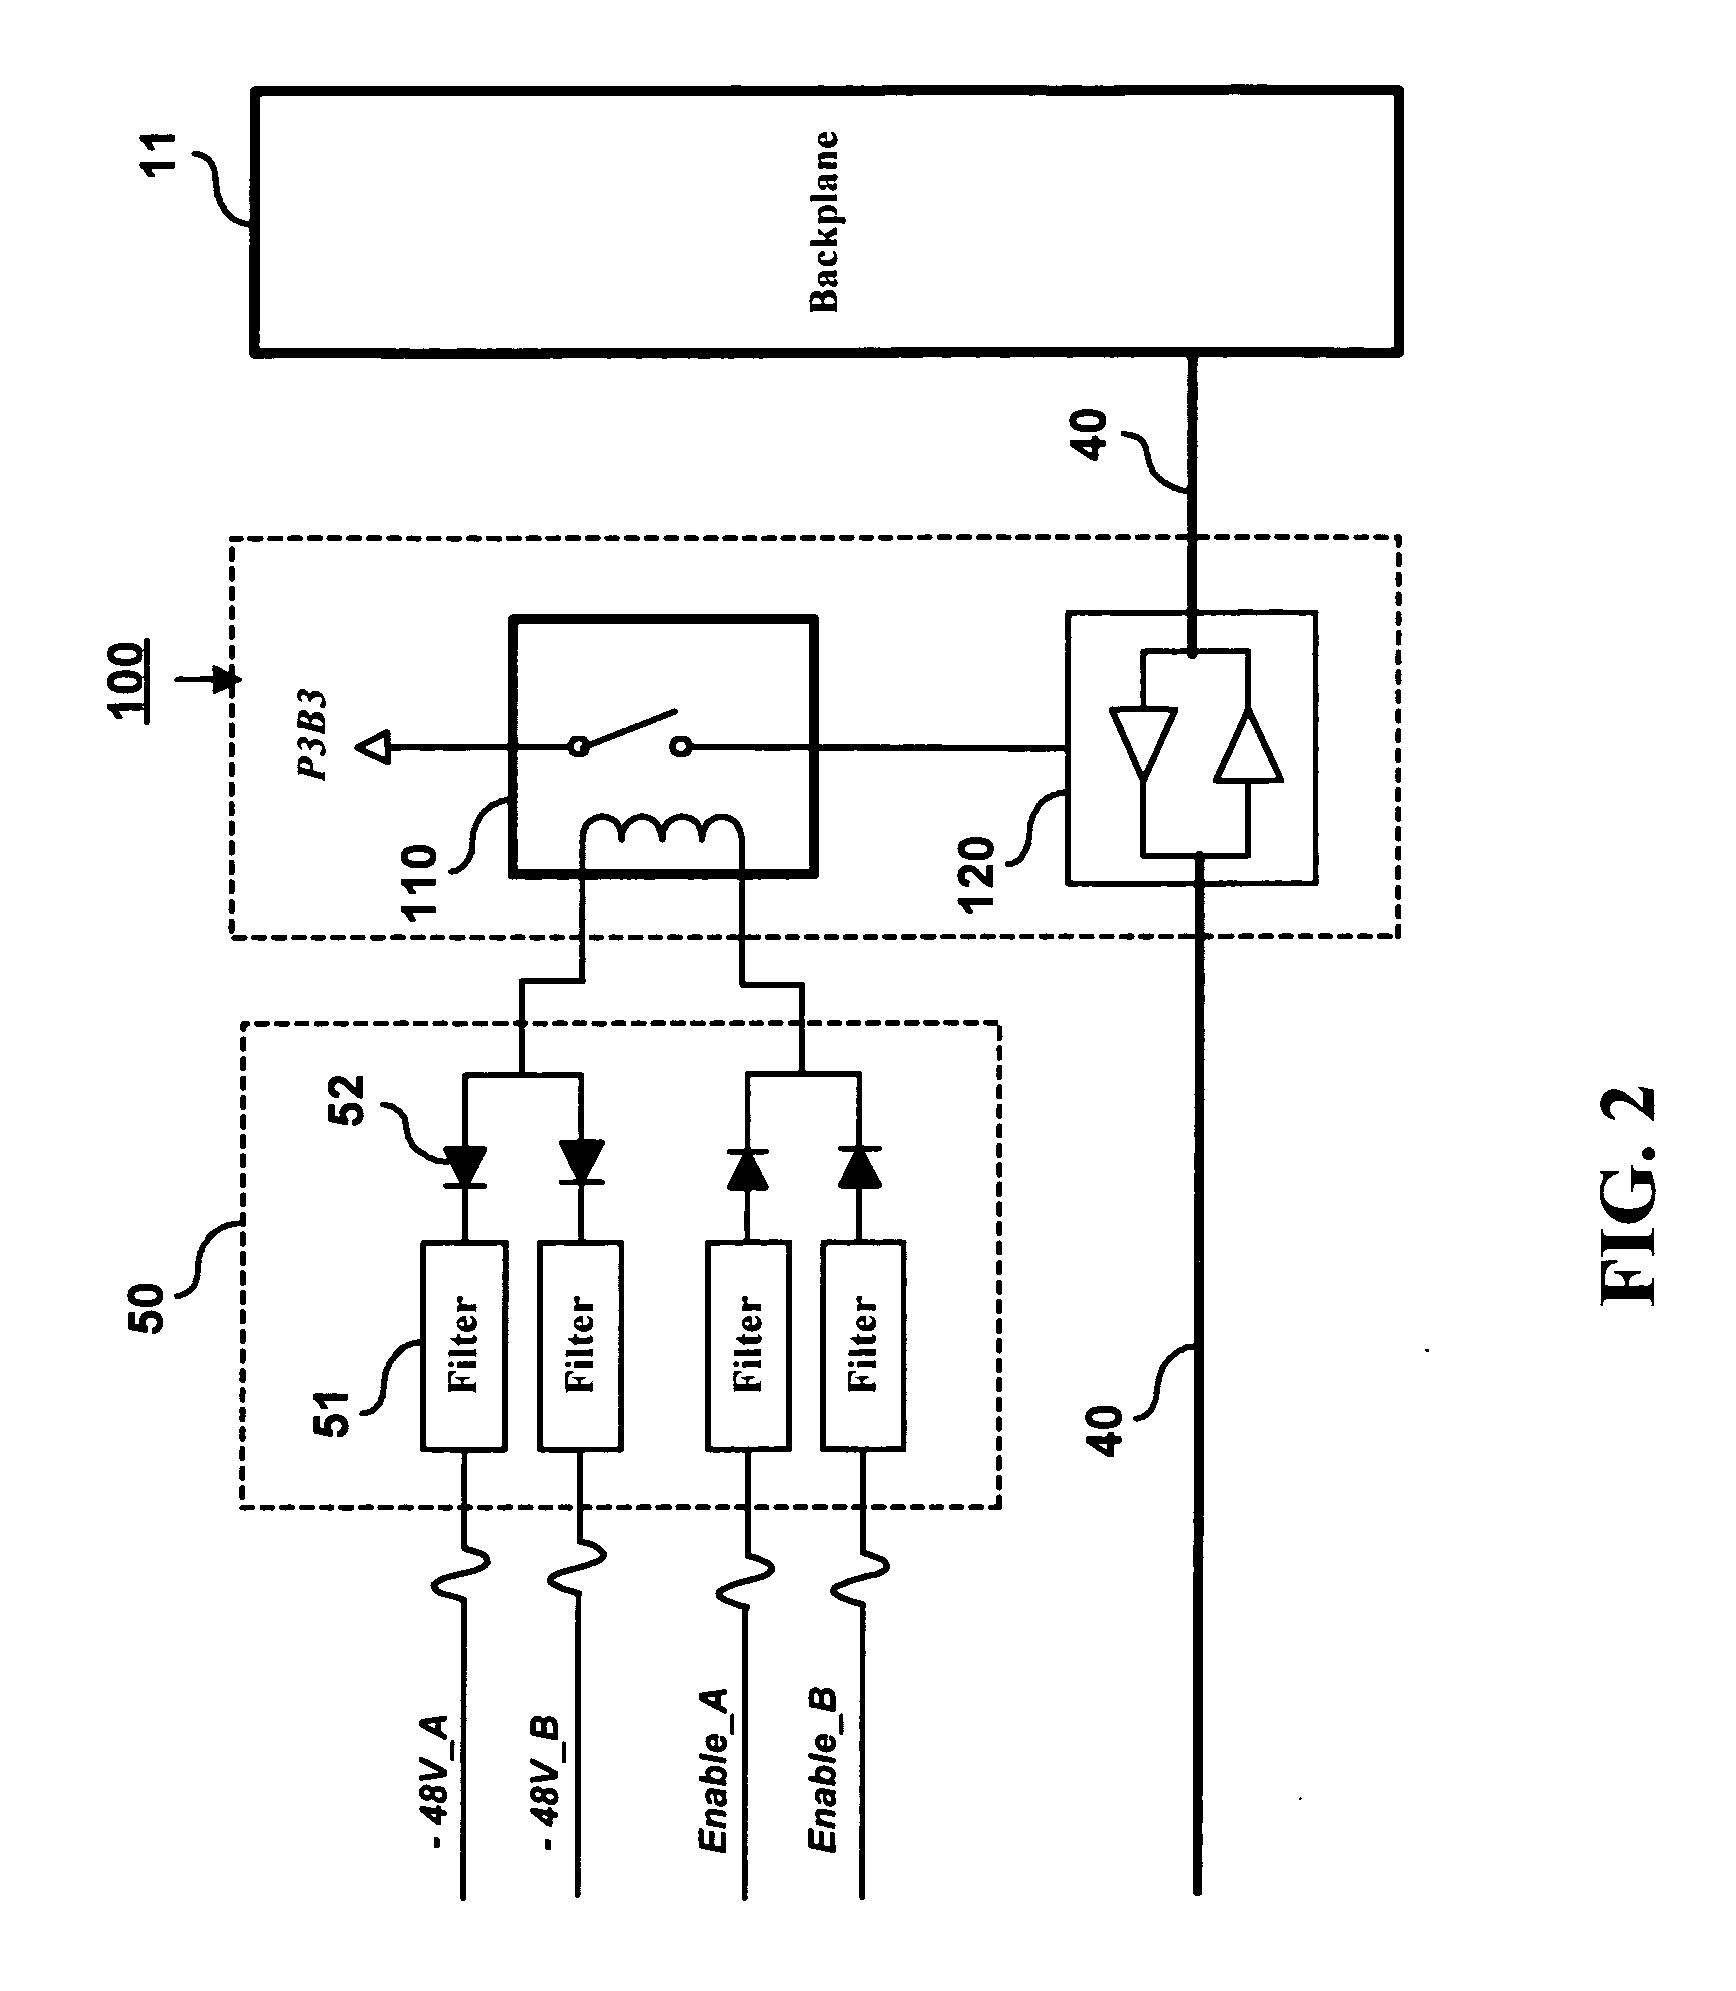 Modularized circuit board bus connection control method and system